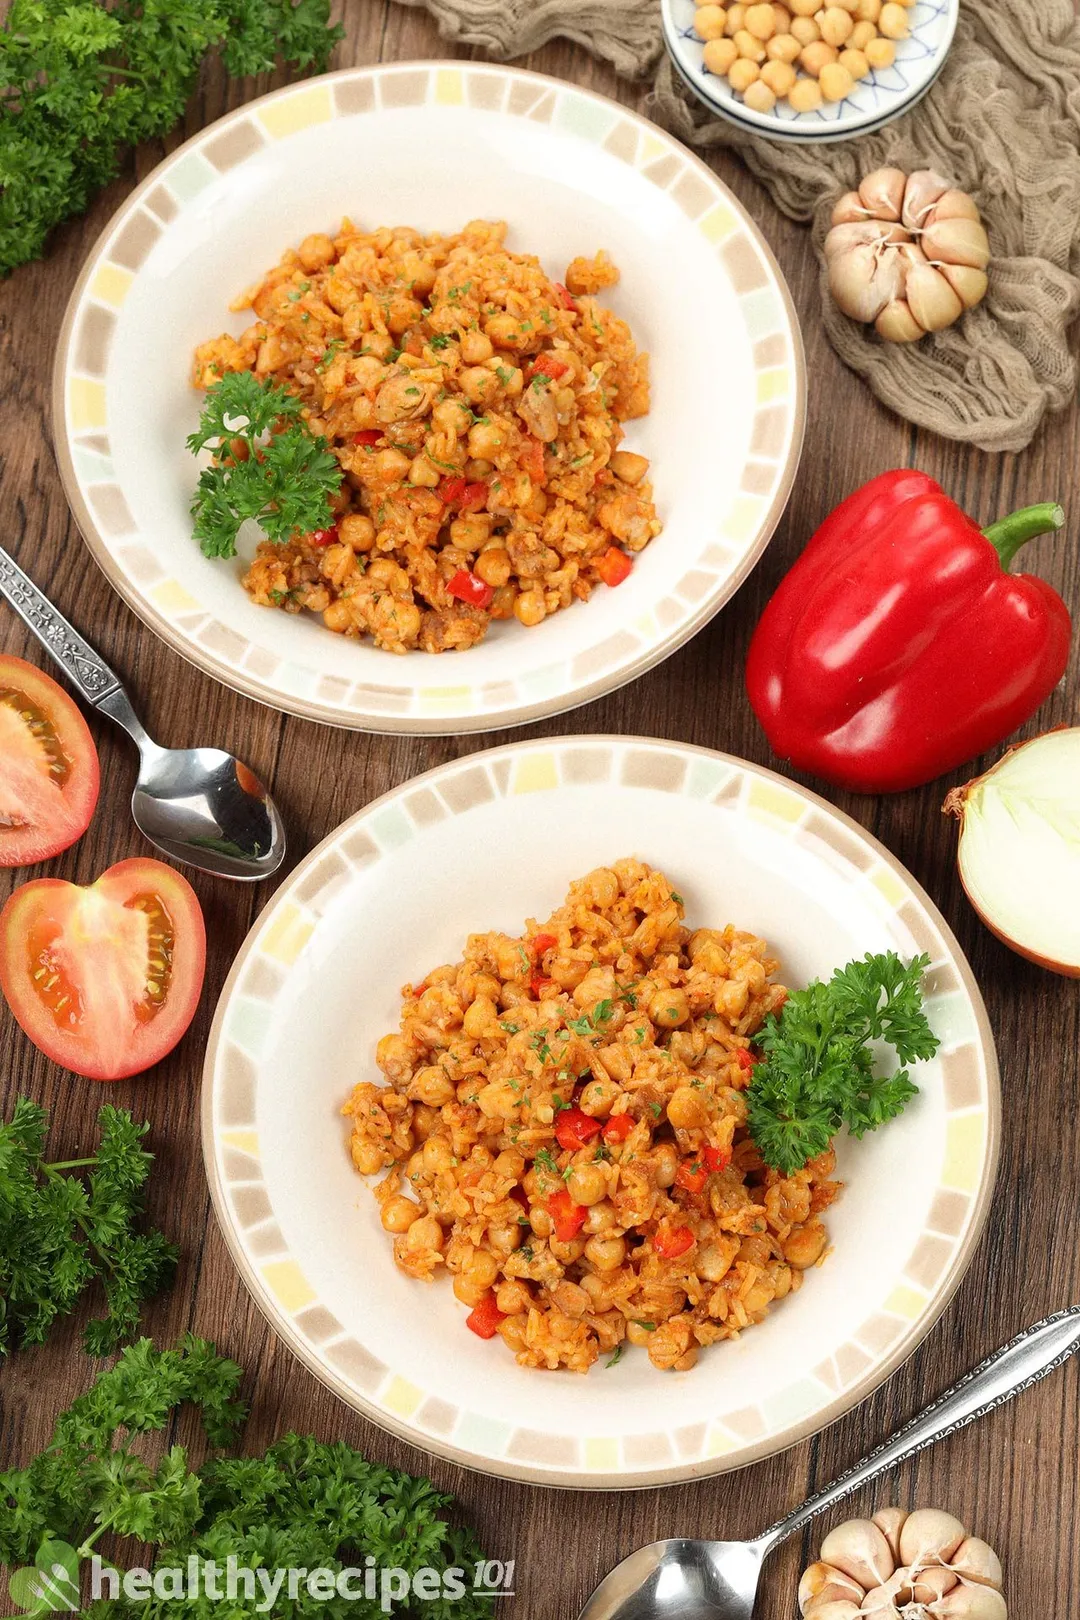 Two plates of chickpea rice surrounded by a red bell pepper, tomato halves, fresh parsley, garlic cloves, and spoons.